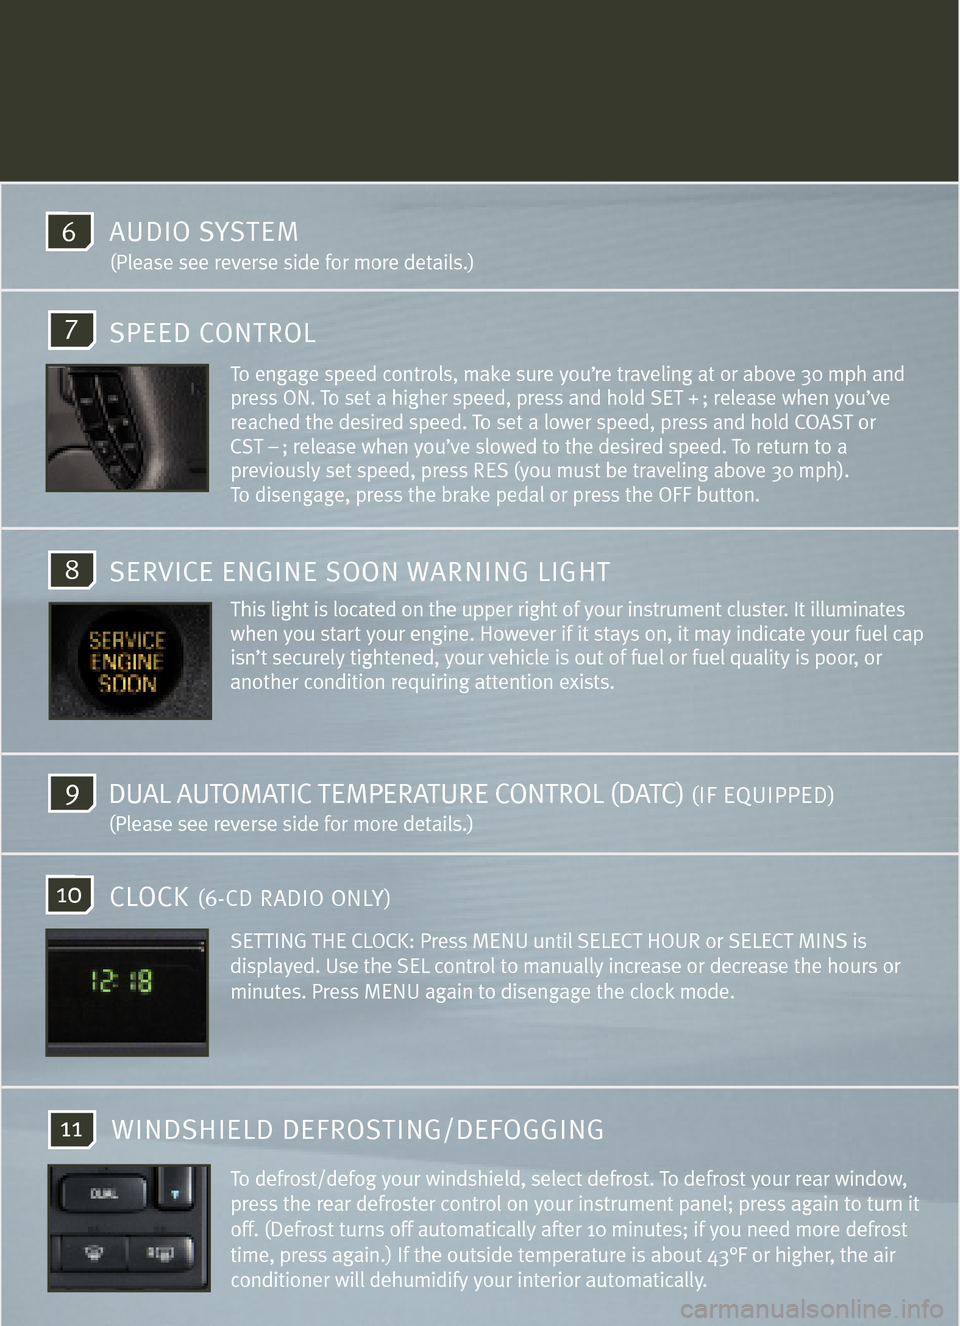 Mercury Mountaineer 2005  Quick Reference Guide 8
10
11
7
9
To engage speed controls, make sure you’re traveling at or above 30 mph and
press ON. To set a higher speed, press and hold SET + ; release when you’ve
reached the desired speed. To se